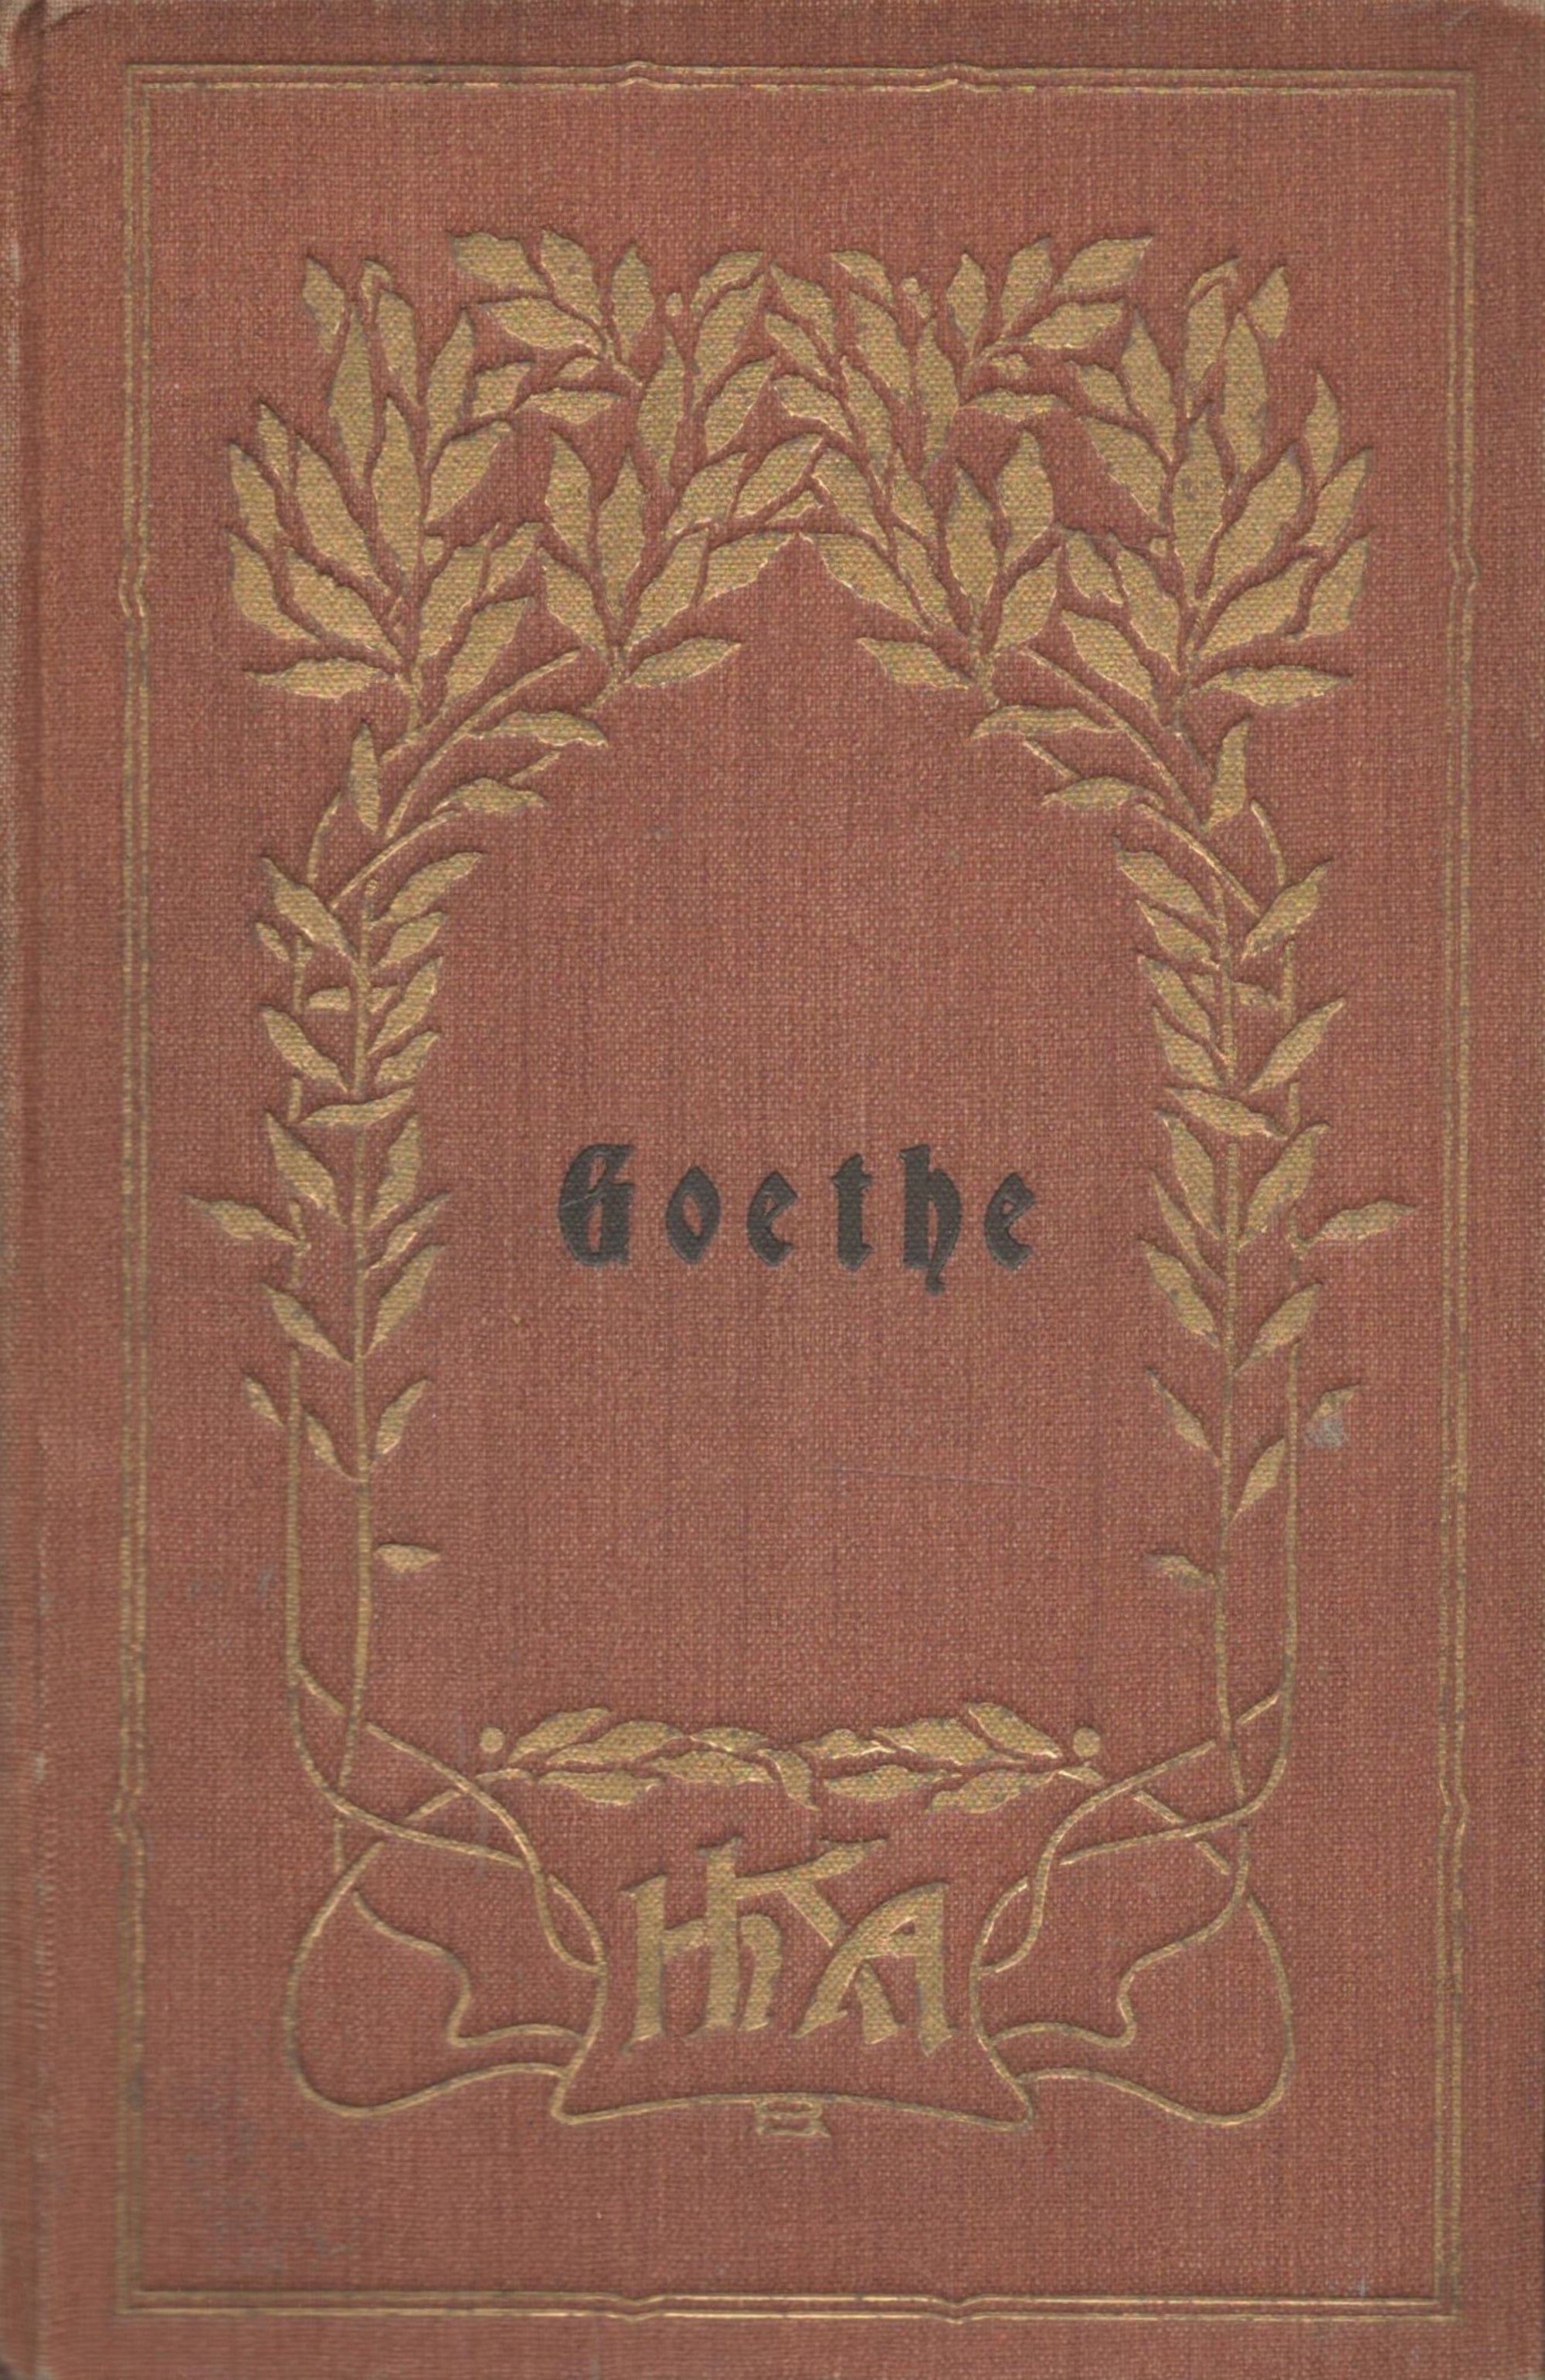 Goethe's Gedichte by Dritter Theil date and edition unknown Hardback Book published by Ferd Dummlers